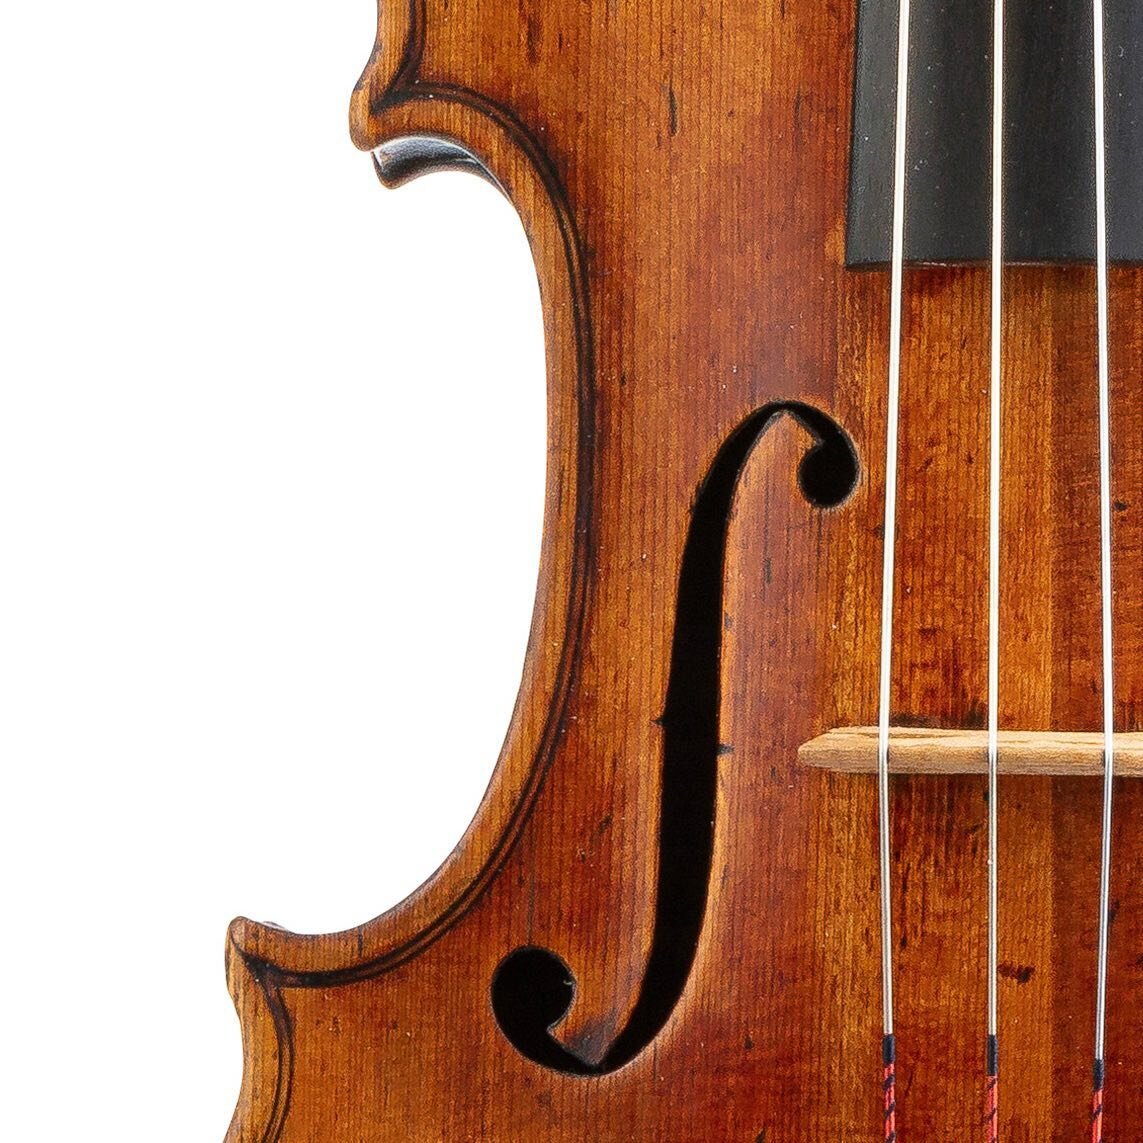 A fine English violin by Charles Harris, c.1820 now available at Ruschil &amp; Bailly, London. 

The violin has a very striking Italian look, due to the stunning transparent red varnish over deeply flamed golden brown maple and fine spruce, Cremonese